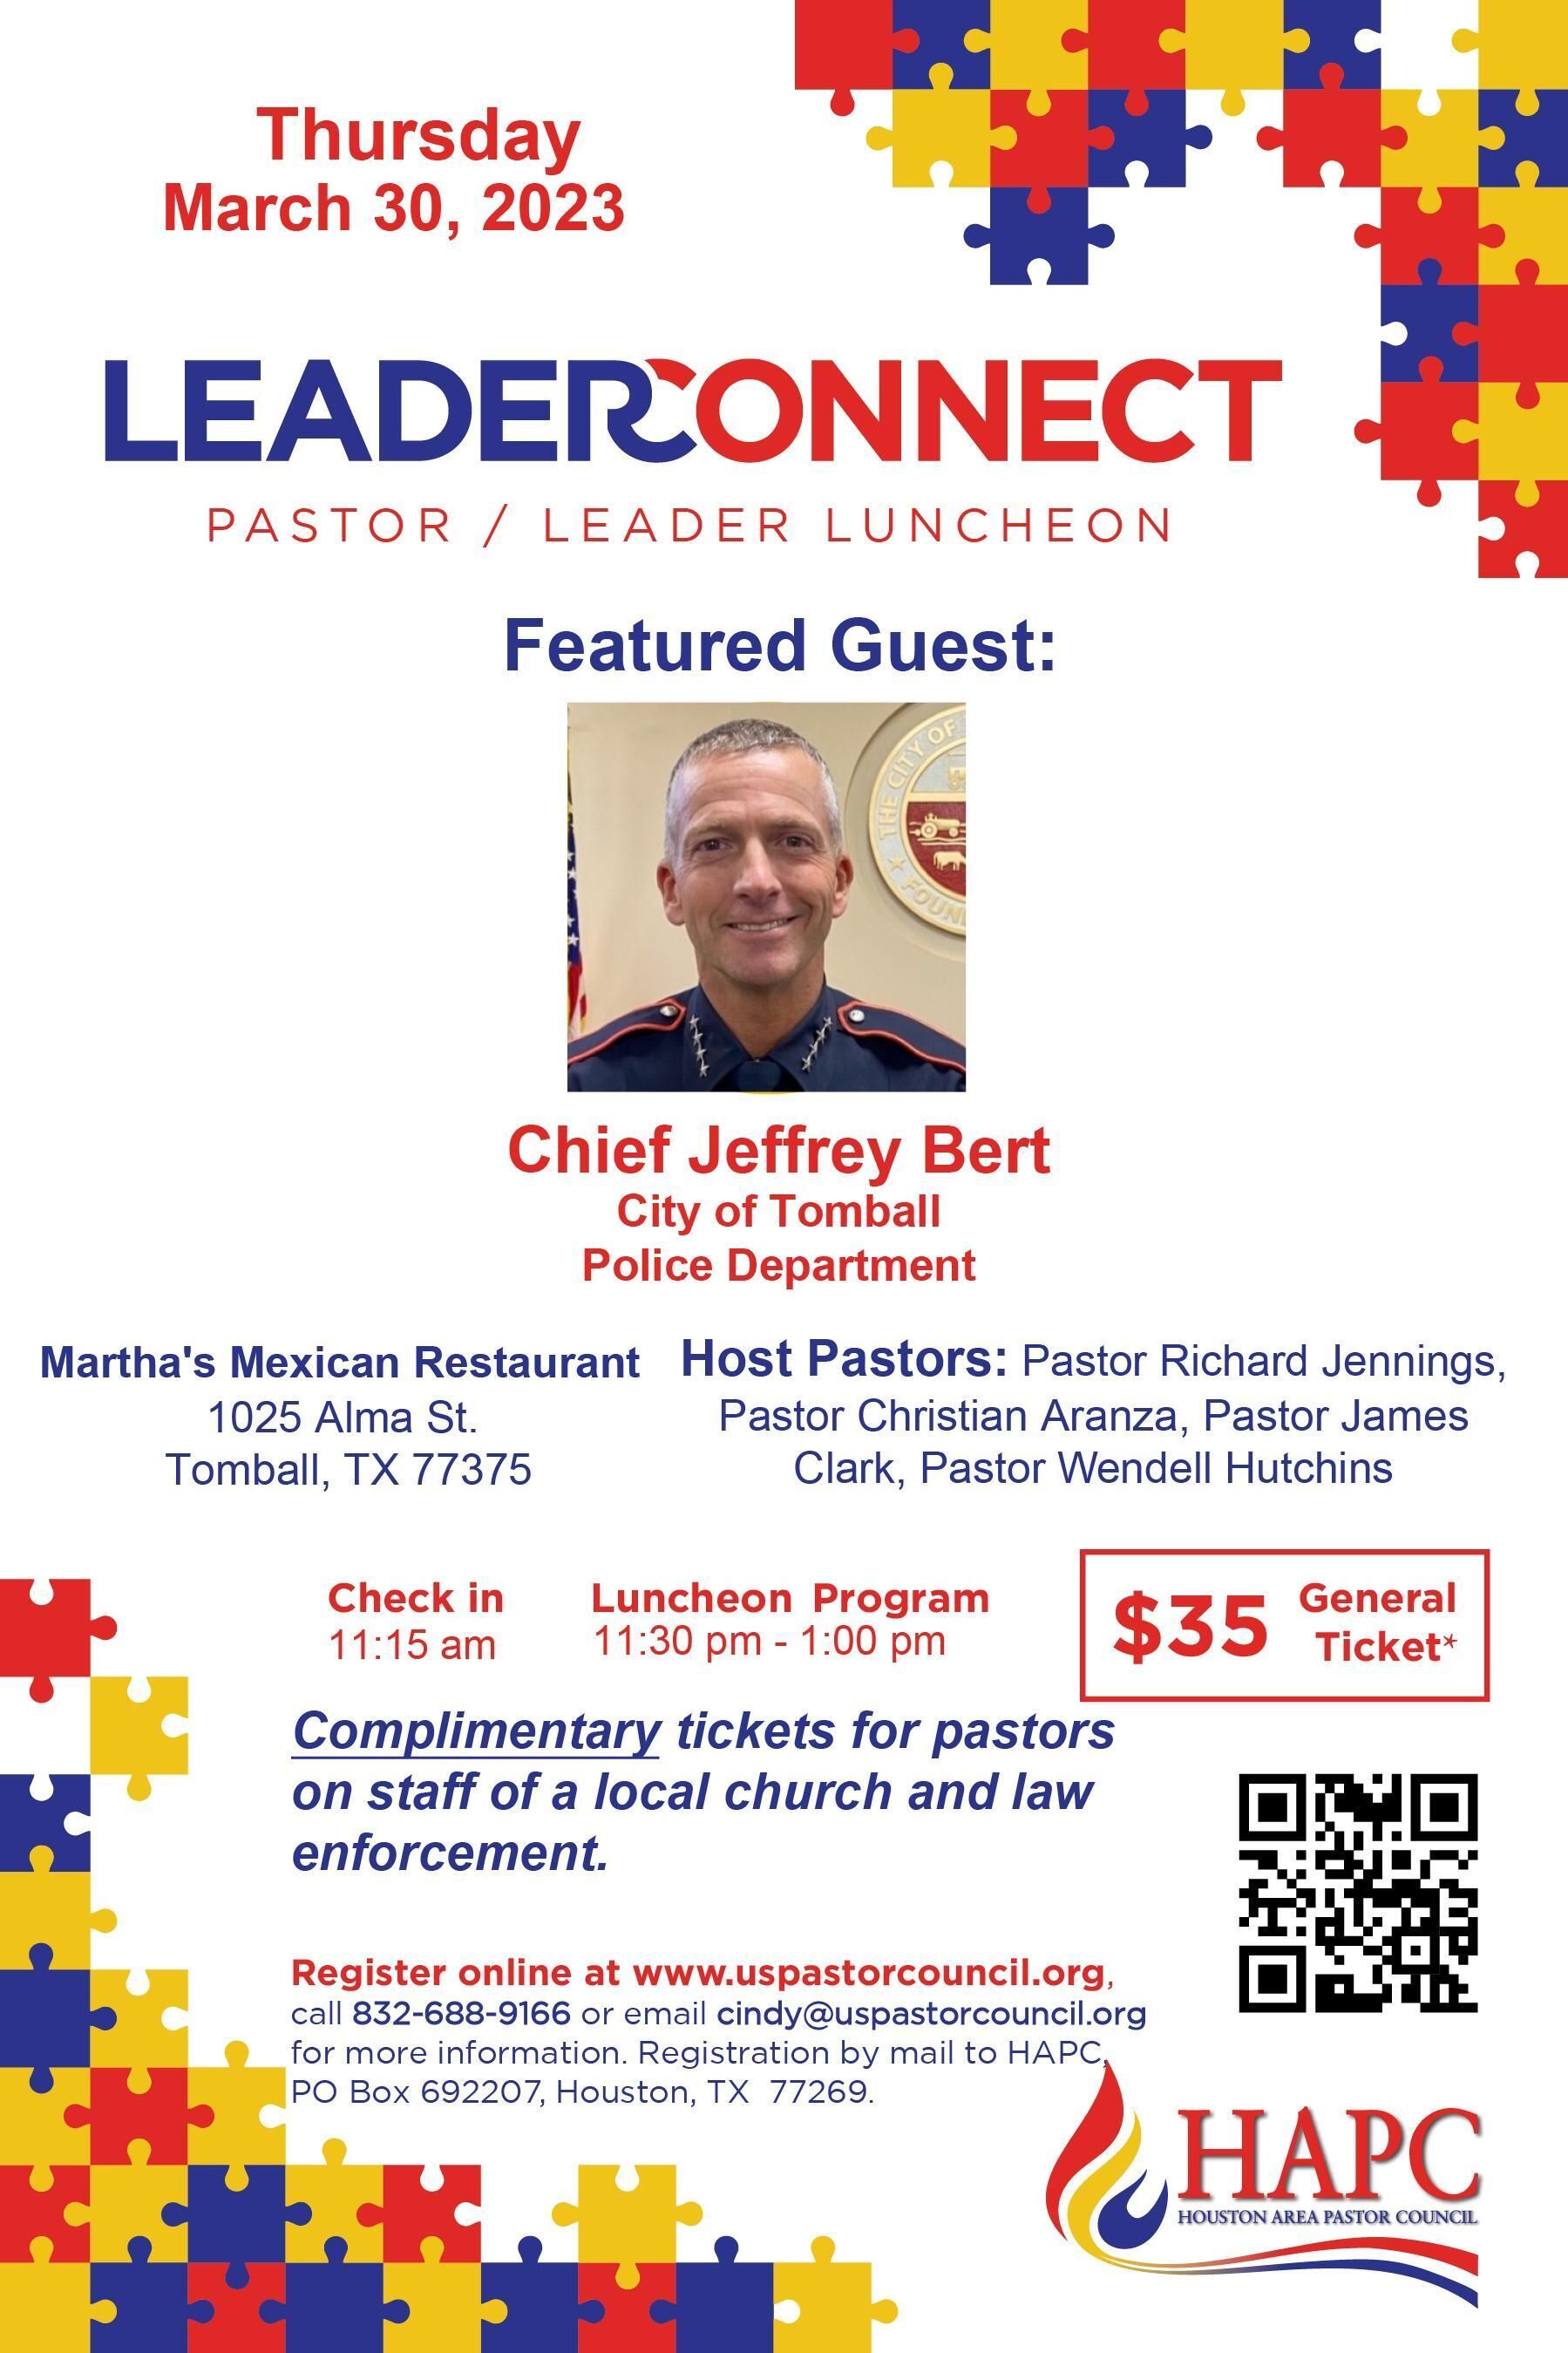 Pastor LeaderConnect Luncheon in Tomball, Texas